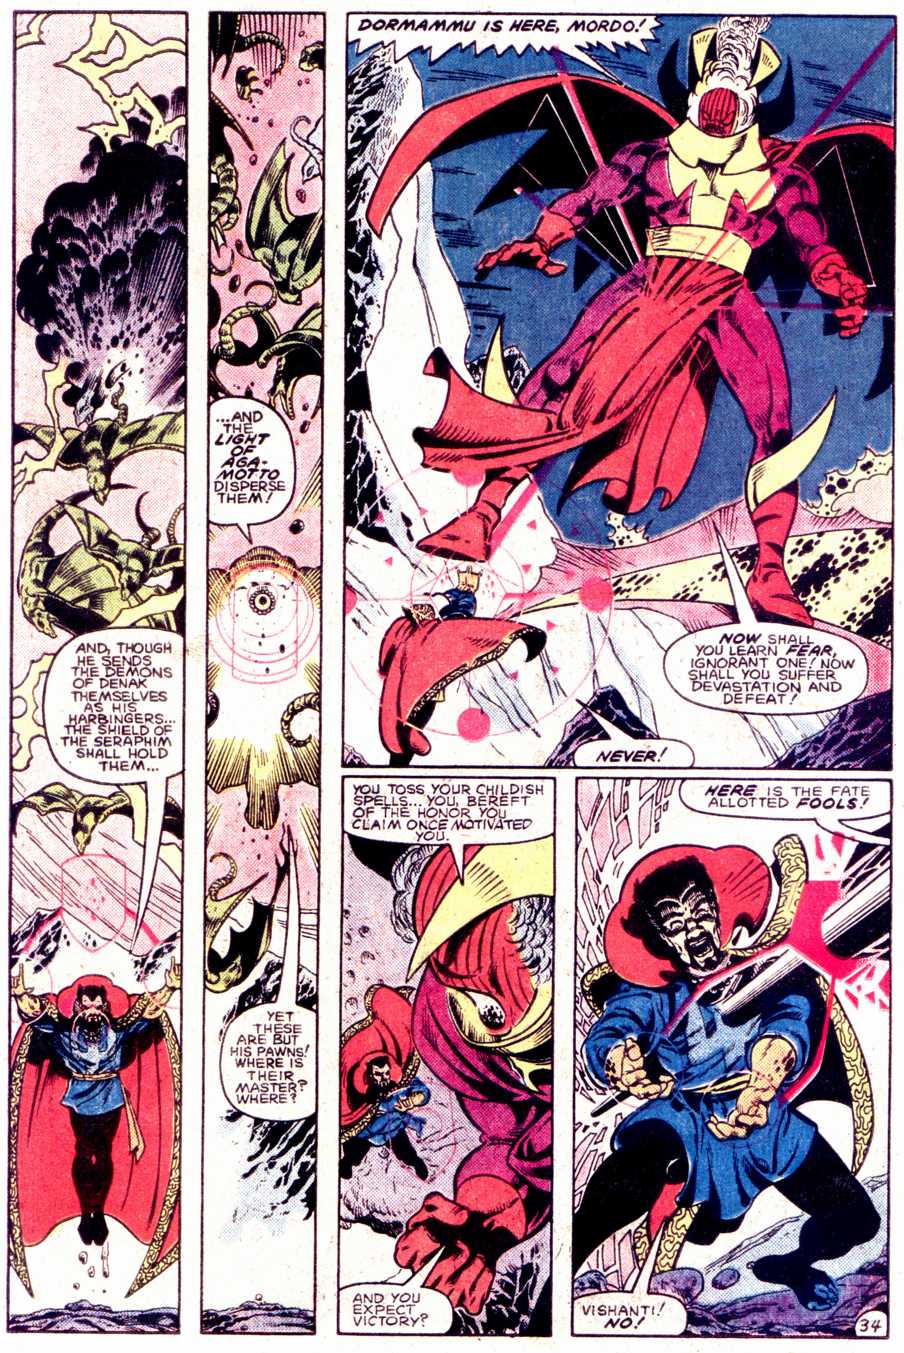 What If? (1977) issue 40 - Dr Strange had not become master of The mystic arts - Page 35